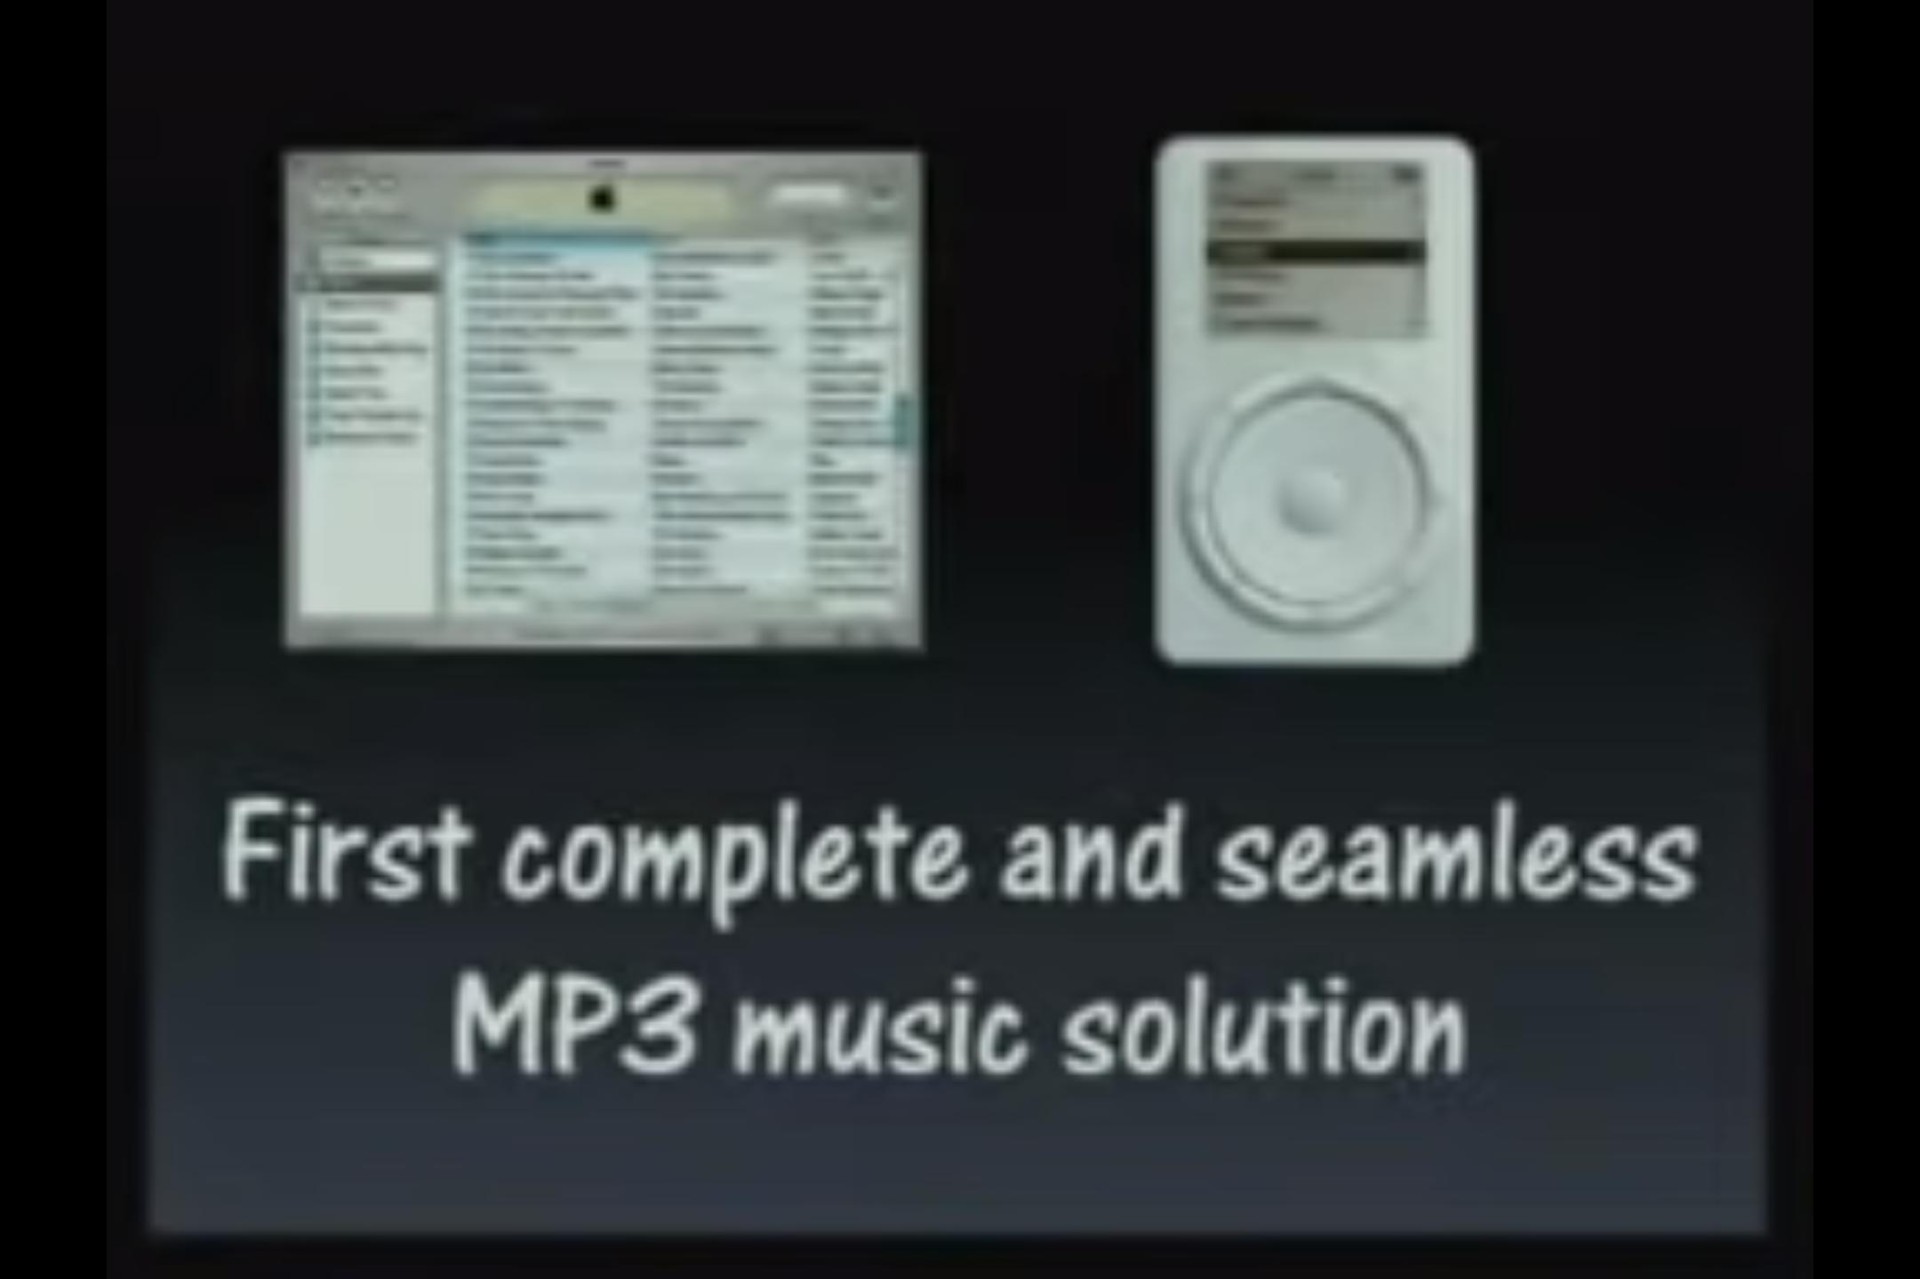 first complete and seamless music solution | Apple